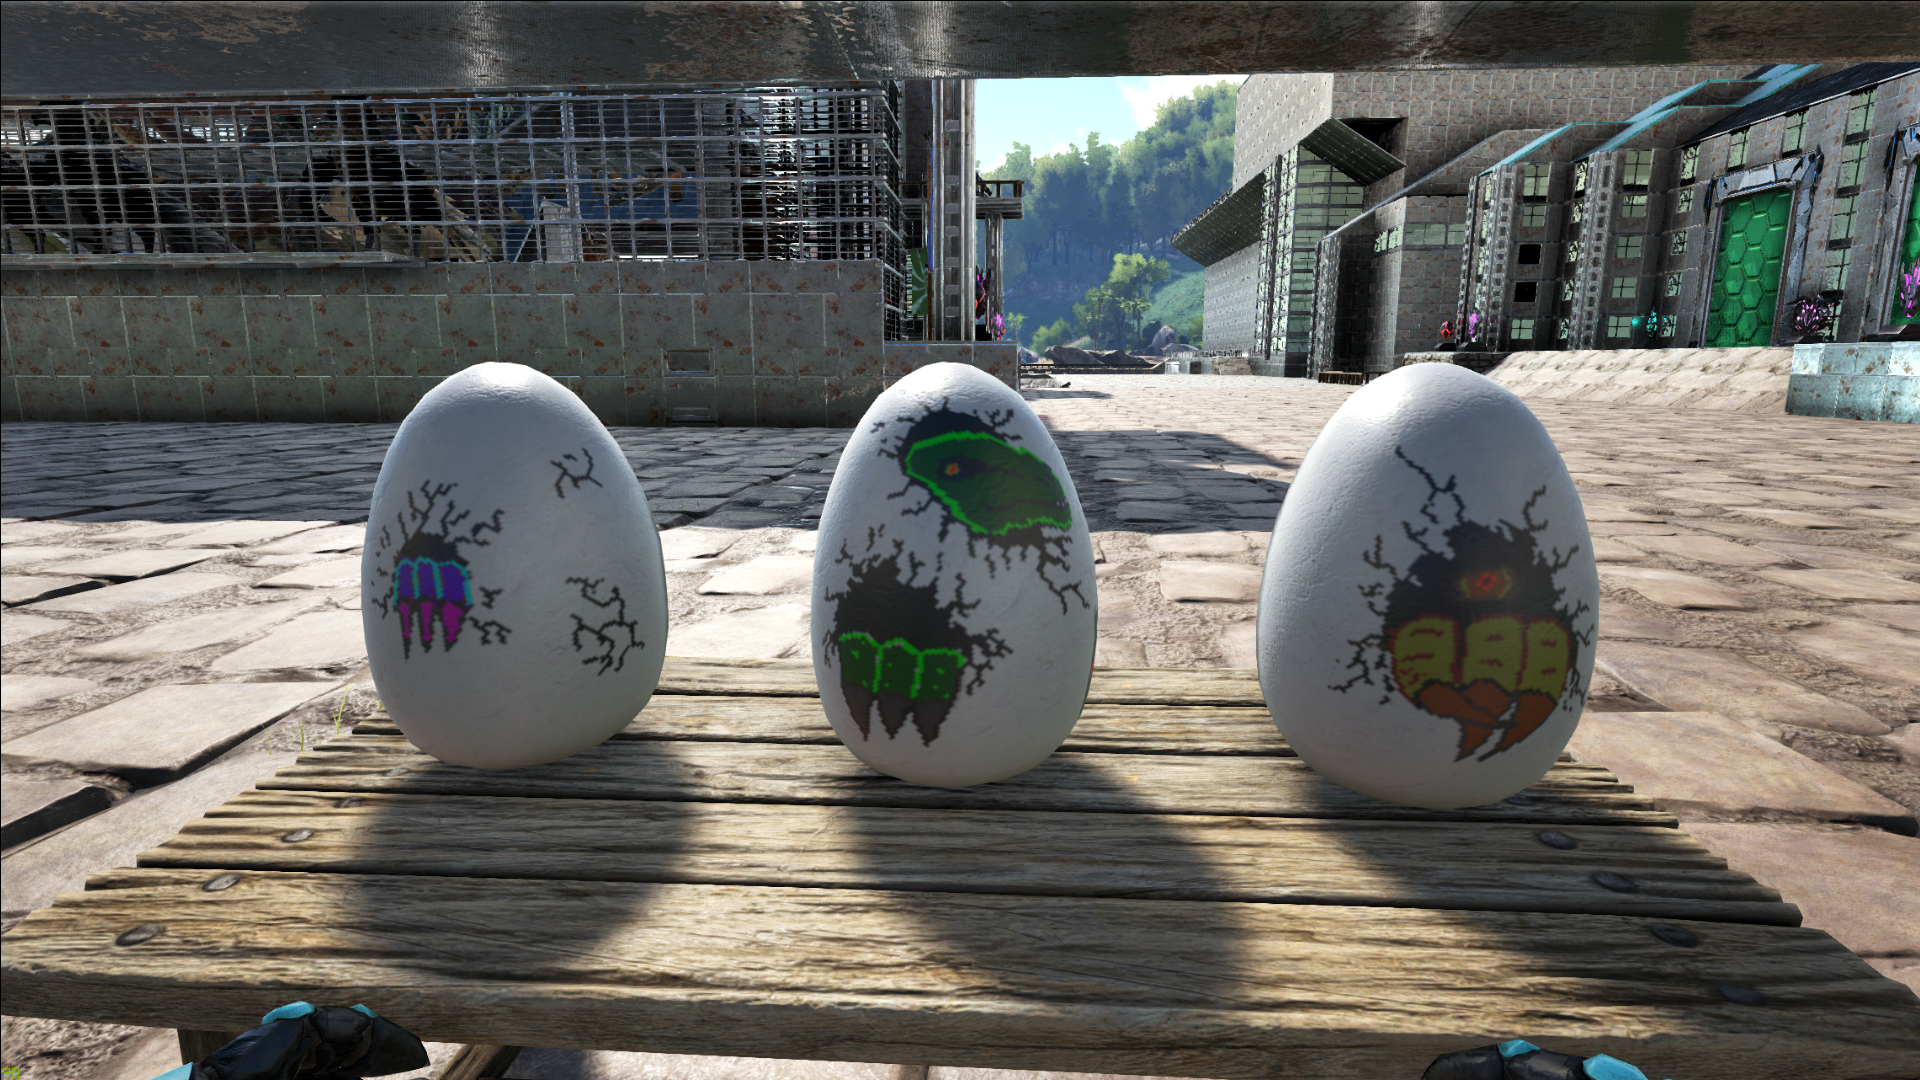 Could I use a deinonychus to steal rock drake eggs on Abberation